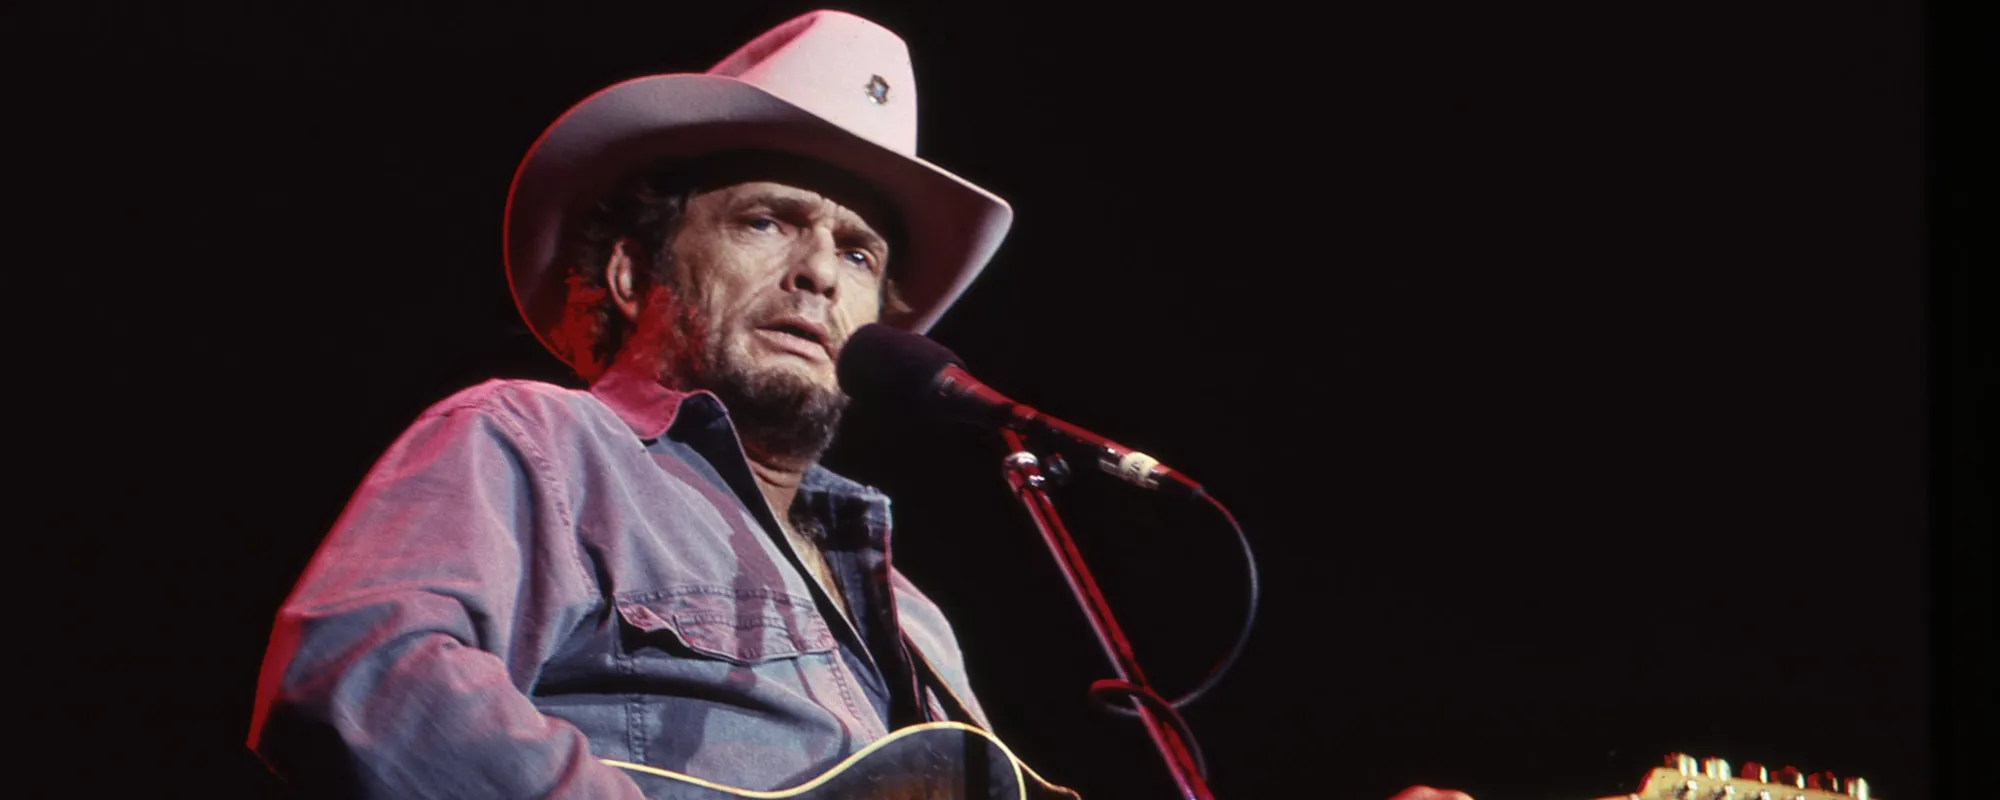 Behind the Meaning of Merle Haggard’s 1969 Anti-Vietnam Protest Song “Okie From Muskogee”